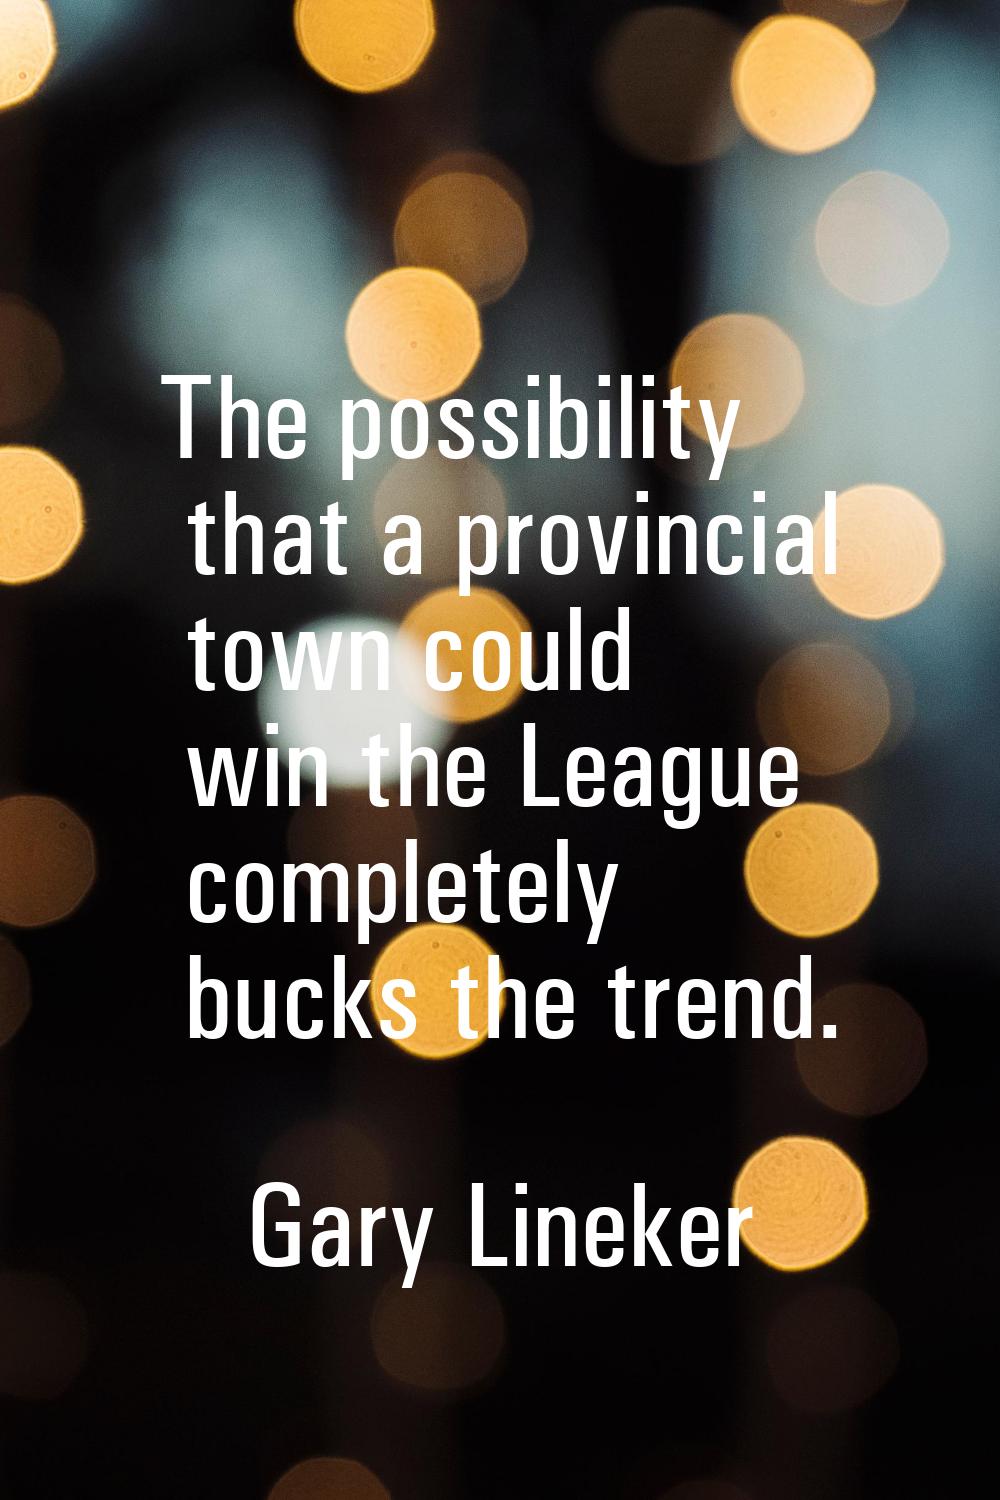 The possibility that a provincial town could win the League completely bucks the trend.